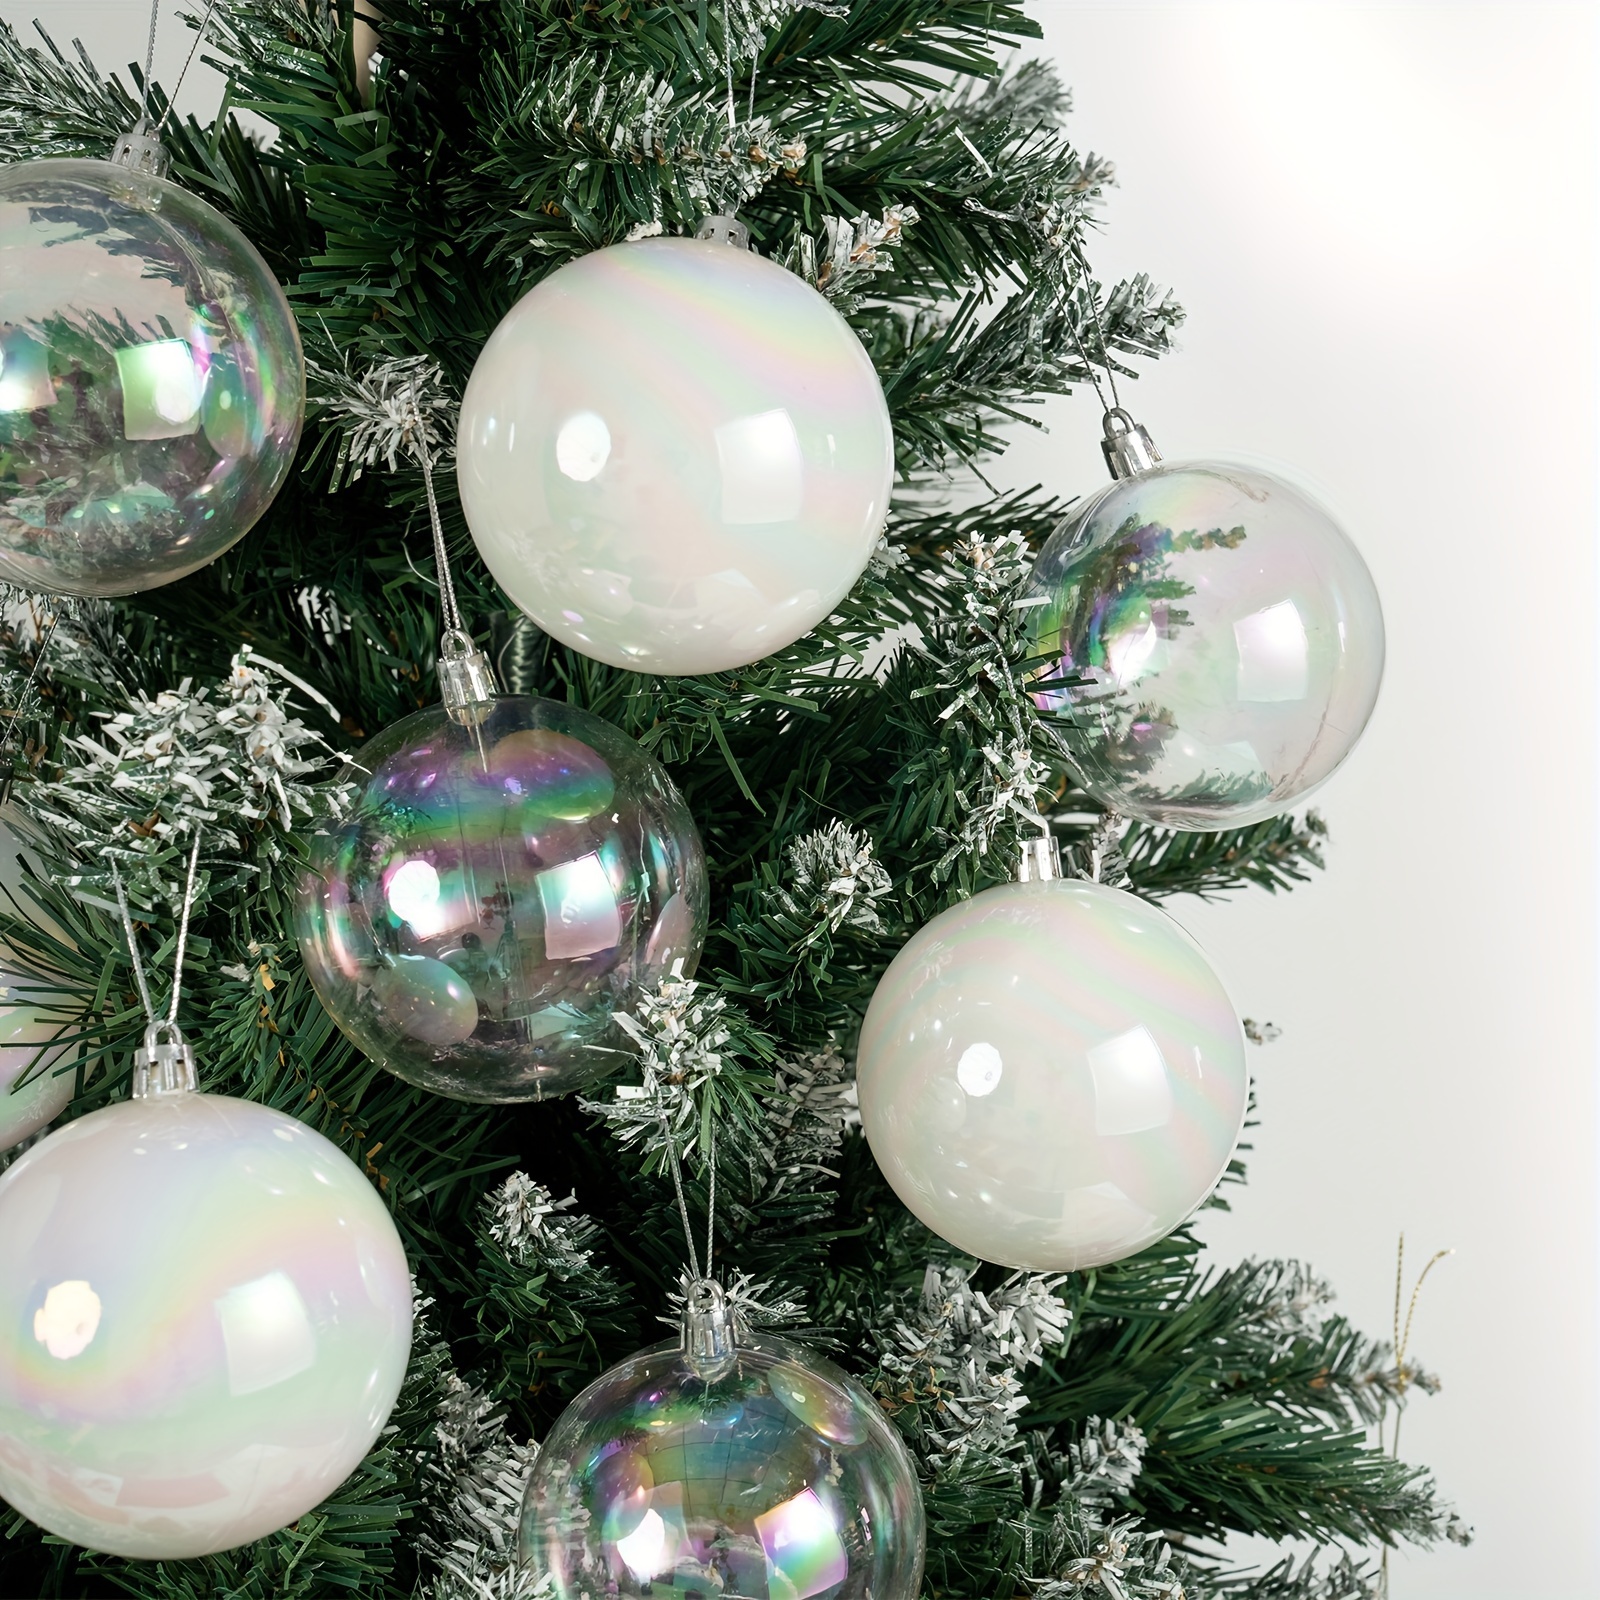 Fillable Christmas Ornaments, 10pcs 3.1 inch Clear Plastic Ball Ornament, DIY Baubles Fillable for Christmas Wedding Party Holiday Decoration, Size